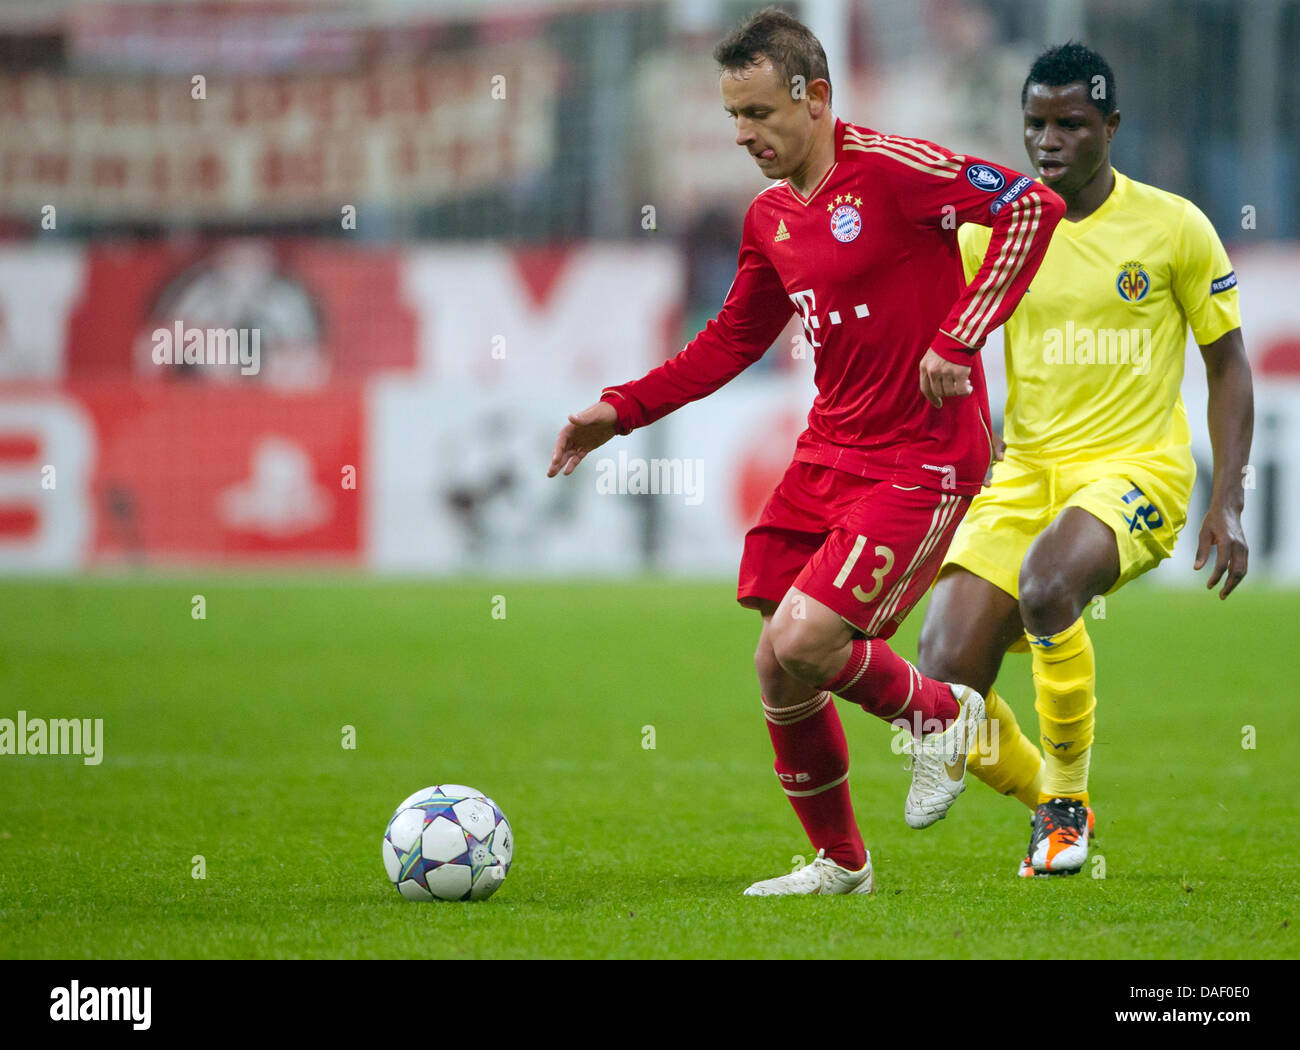 Munichs's Rafinha (L) and Villarreal's Wakaso Mubarak vie for the ball during the Champions League group A soccer match between FC Bayern Munich and Villarreal CF at the Allianz-Arena in Munich, Germany 22 November 2011. Photo: Sven Hoppe dpa Stock Photo